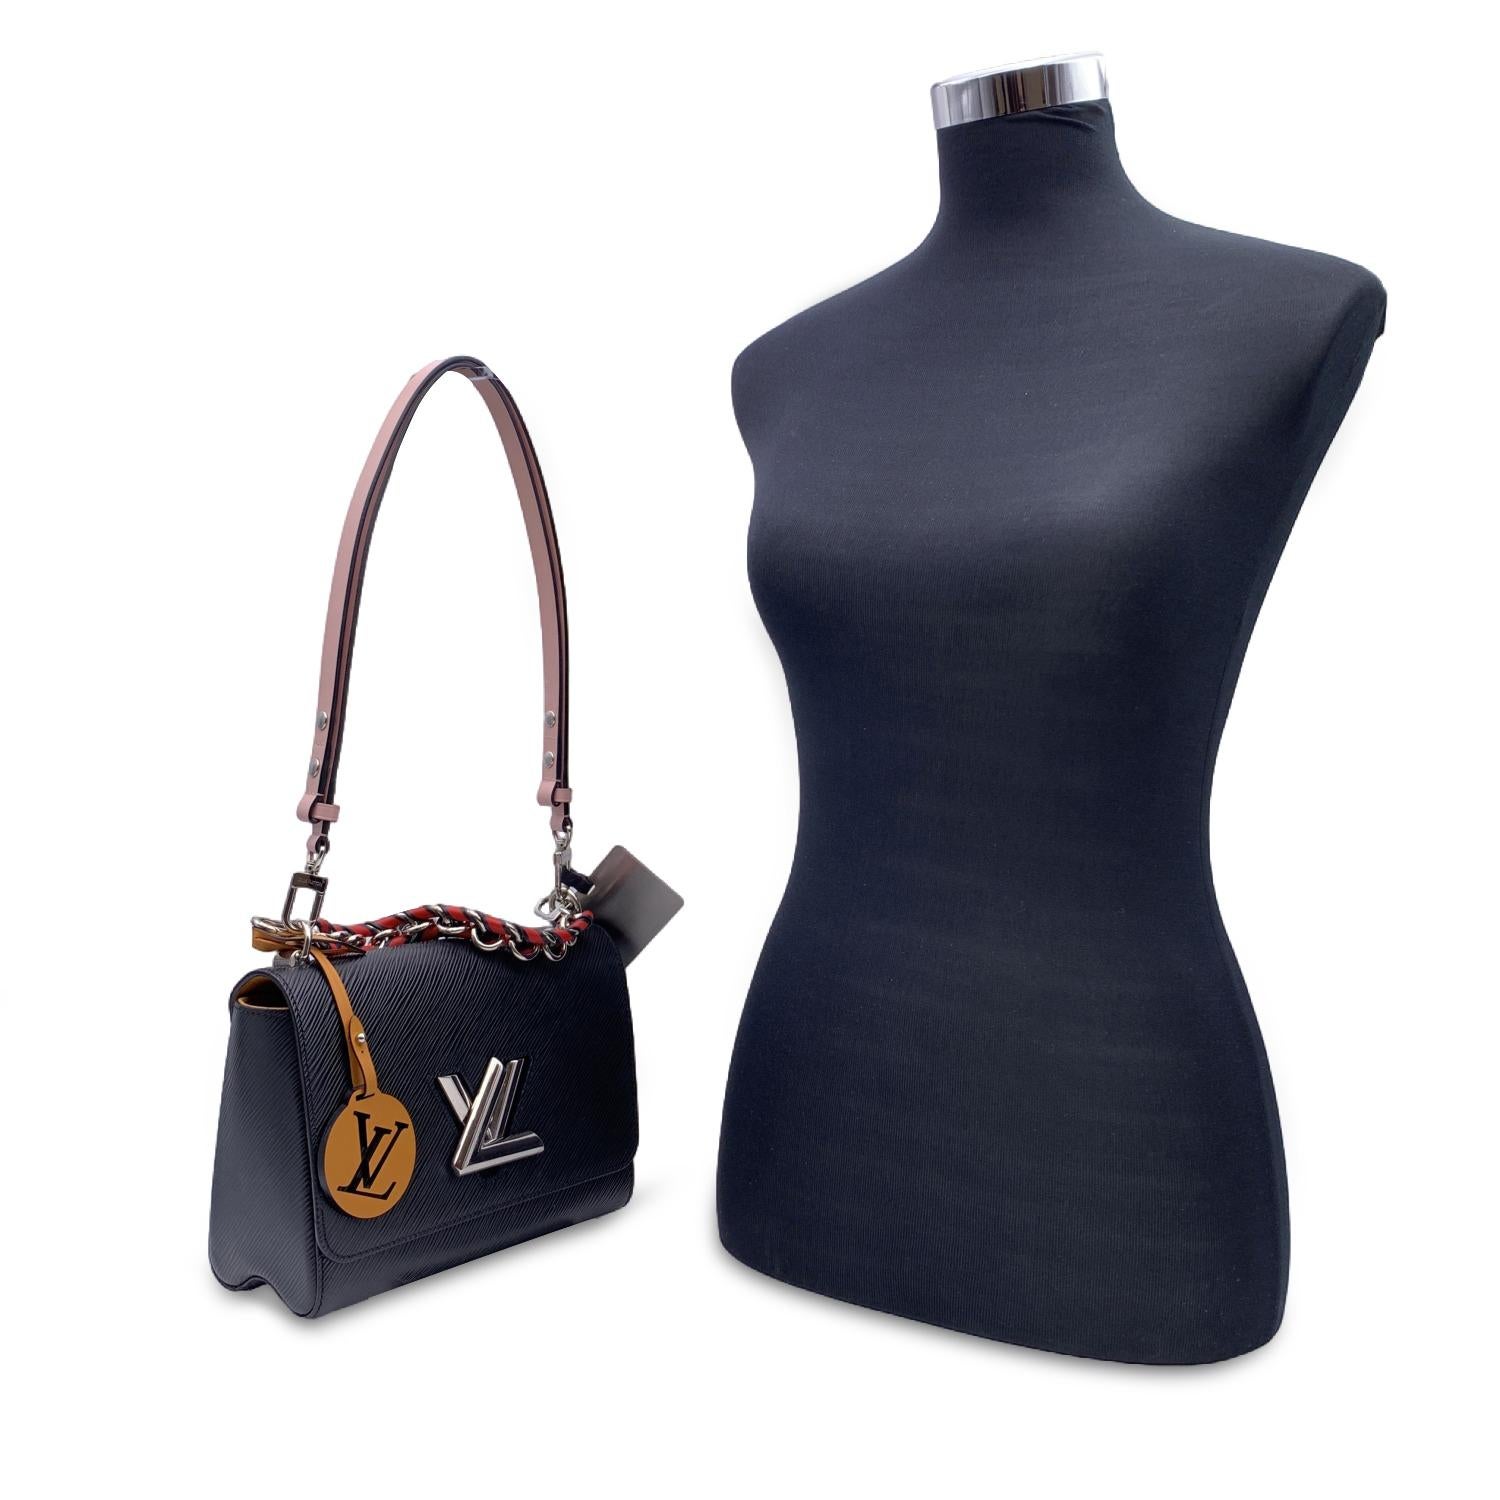 This beautiful Bag will come with a Certificate of Authenticity provided by Entrupy. The certificate will be provided at no further cost.

Elegant Louis Vuitton 'Twist MM' shoulder bag , crafted in black epi leather. Silver metal hardware. The Louis